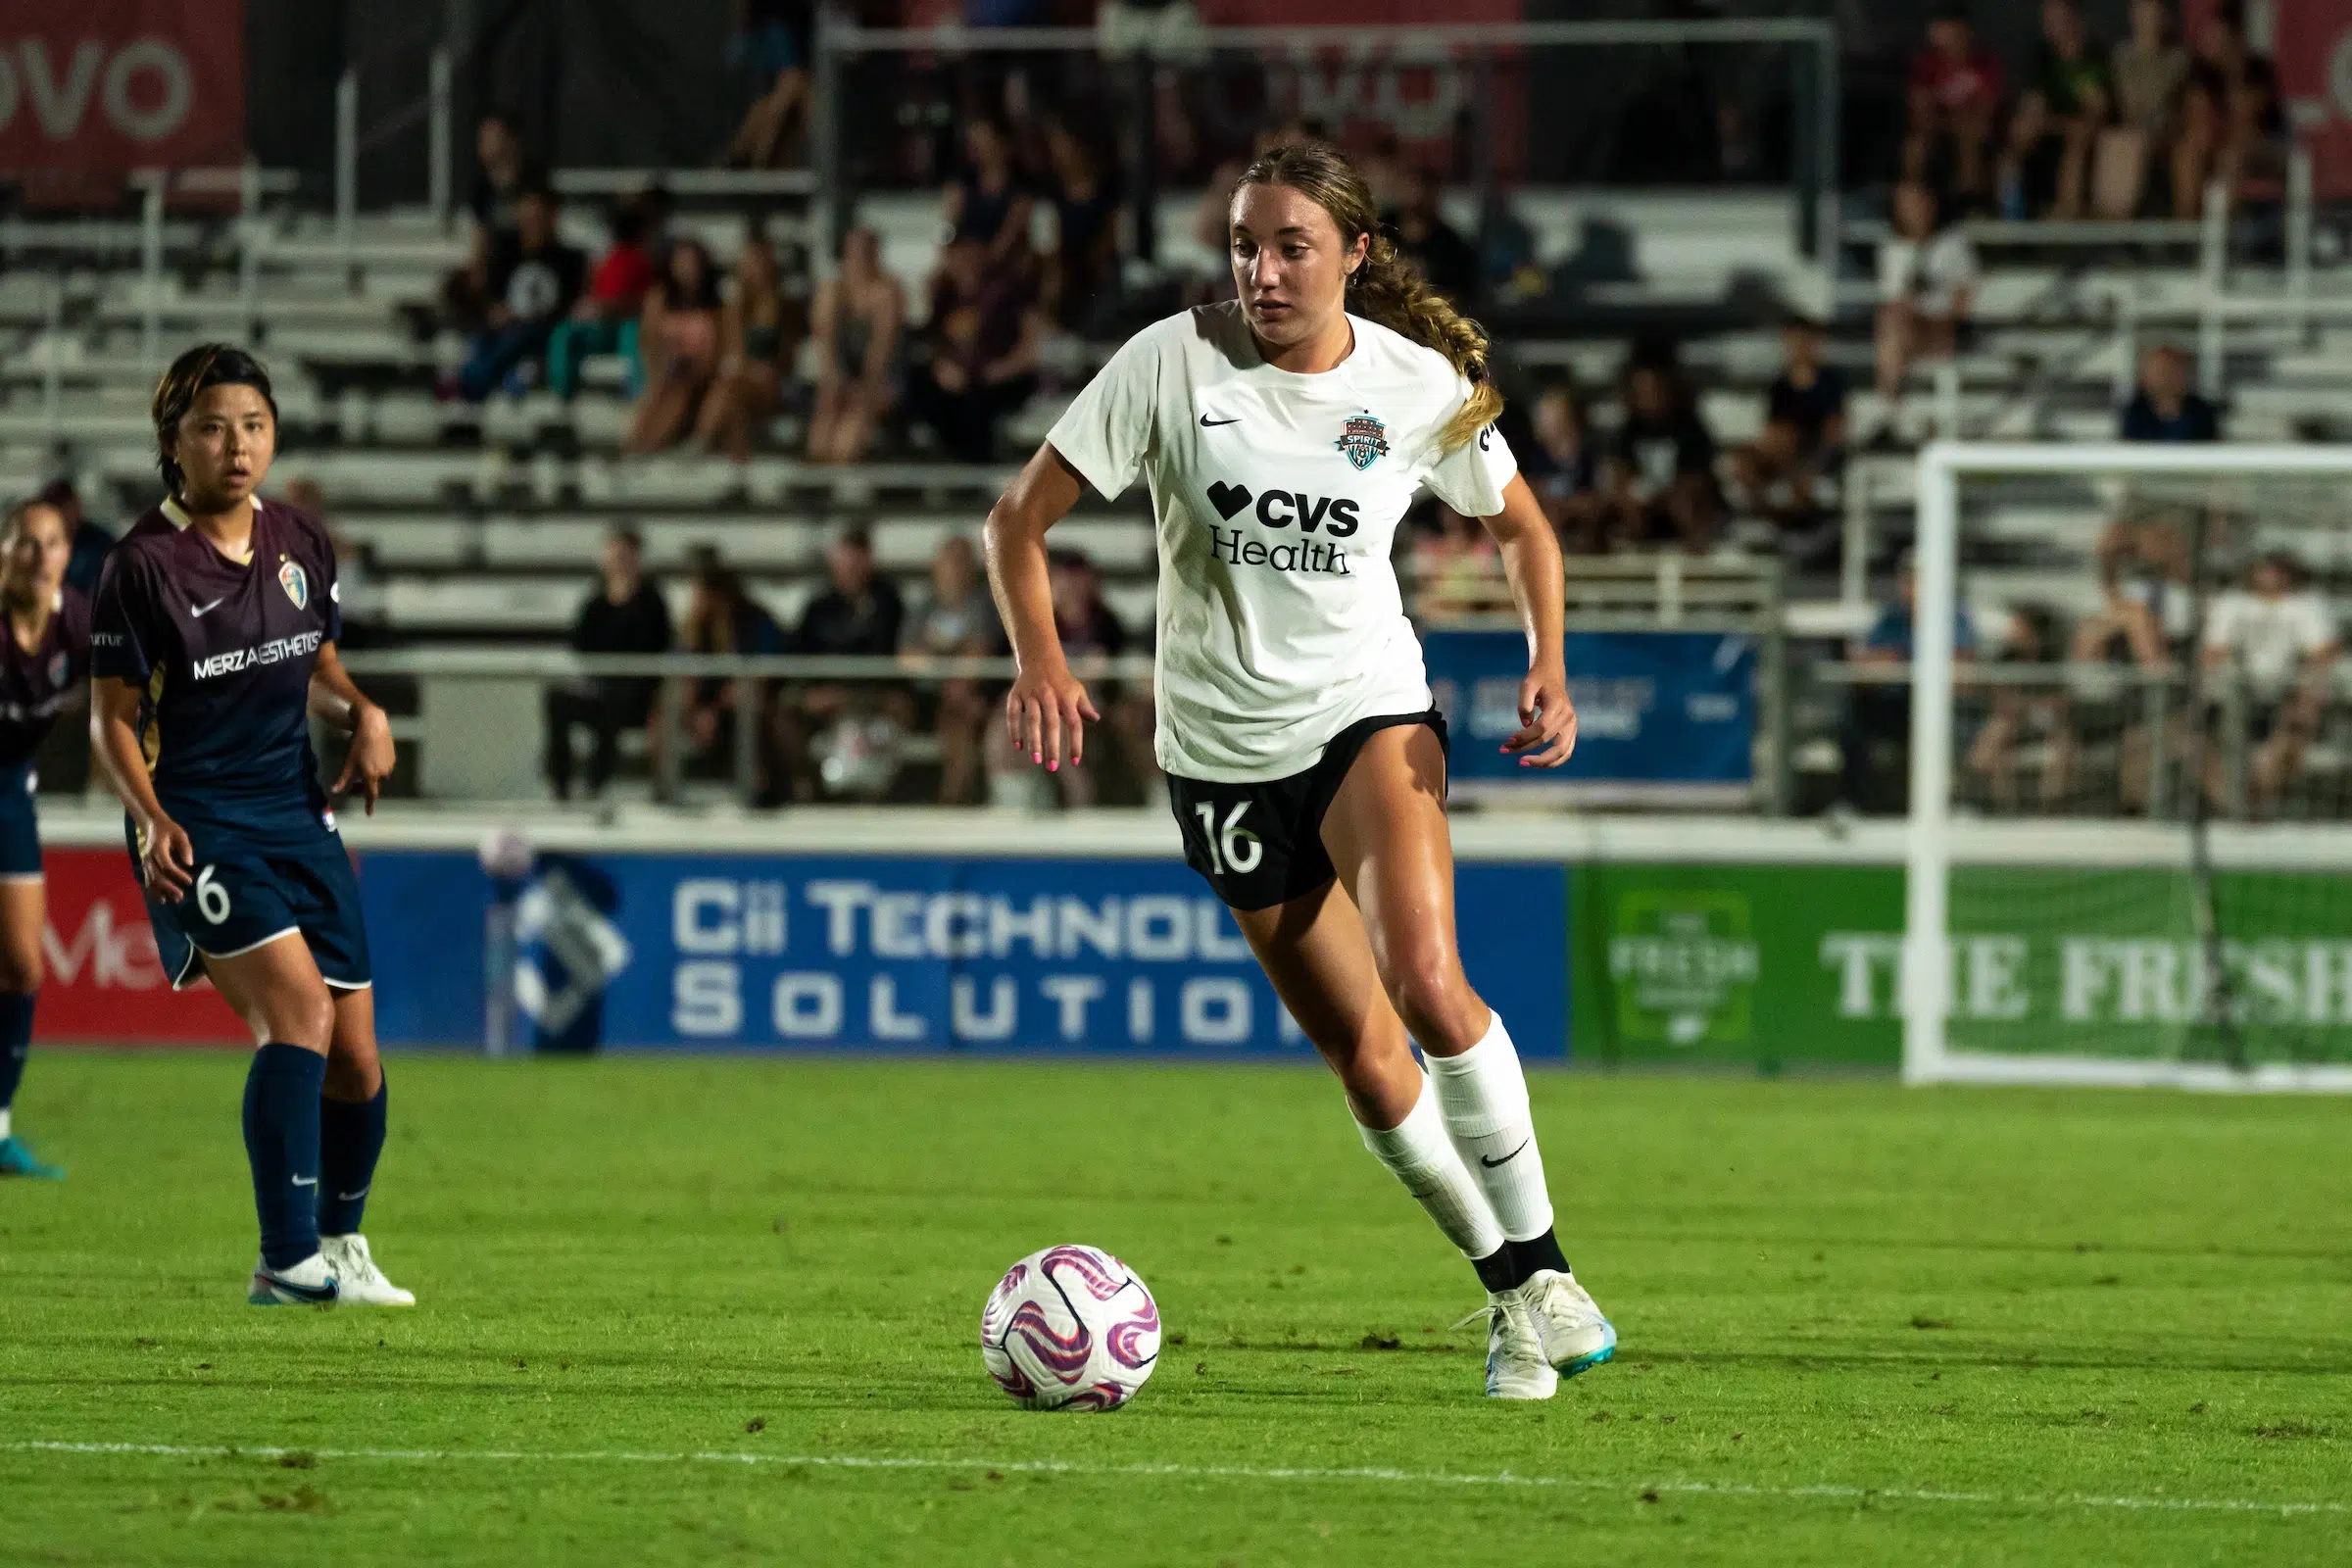 Nicole Douglas in a white top, black shorts and white socks dribbles a soccer ball as a defender in a dark uniform looks on.